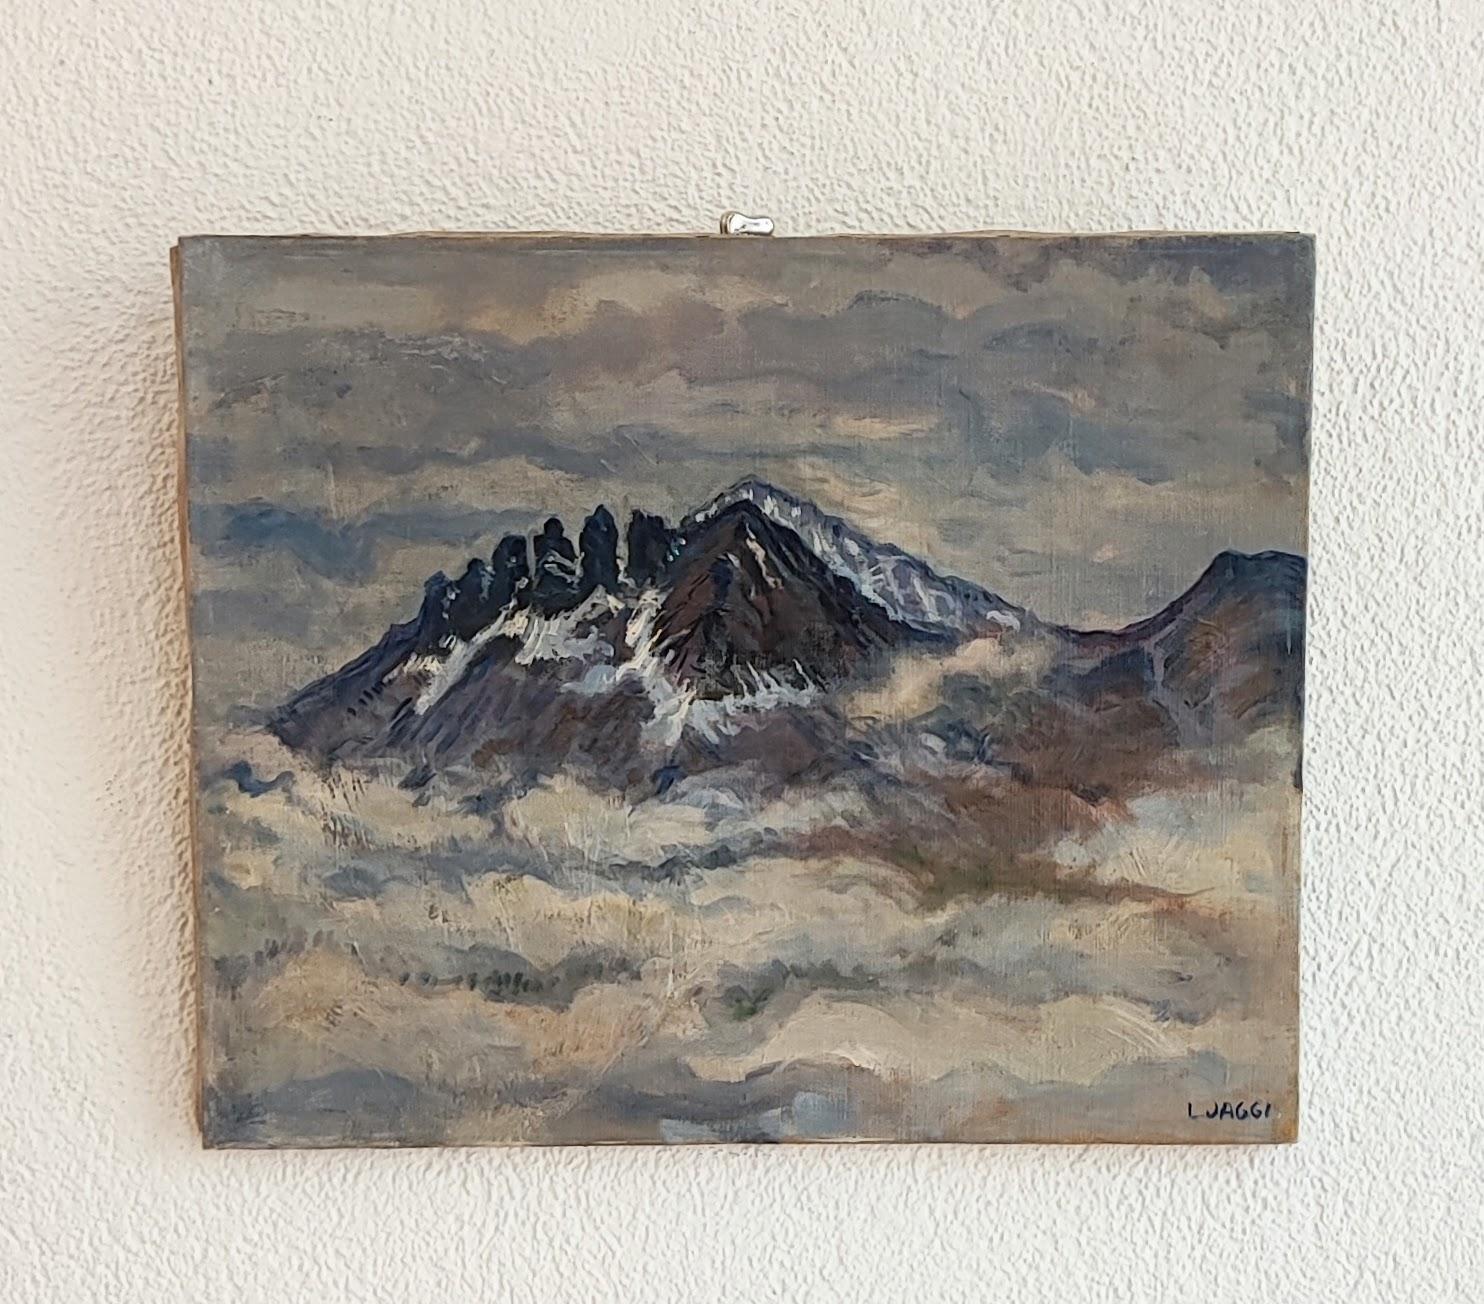 Toothed mountains - Painting by Lucien Jaggi